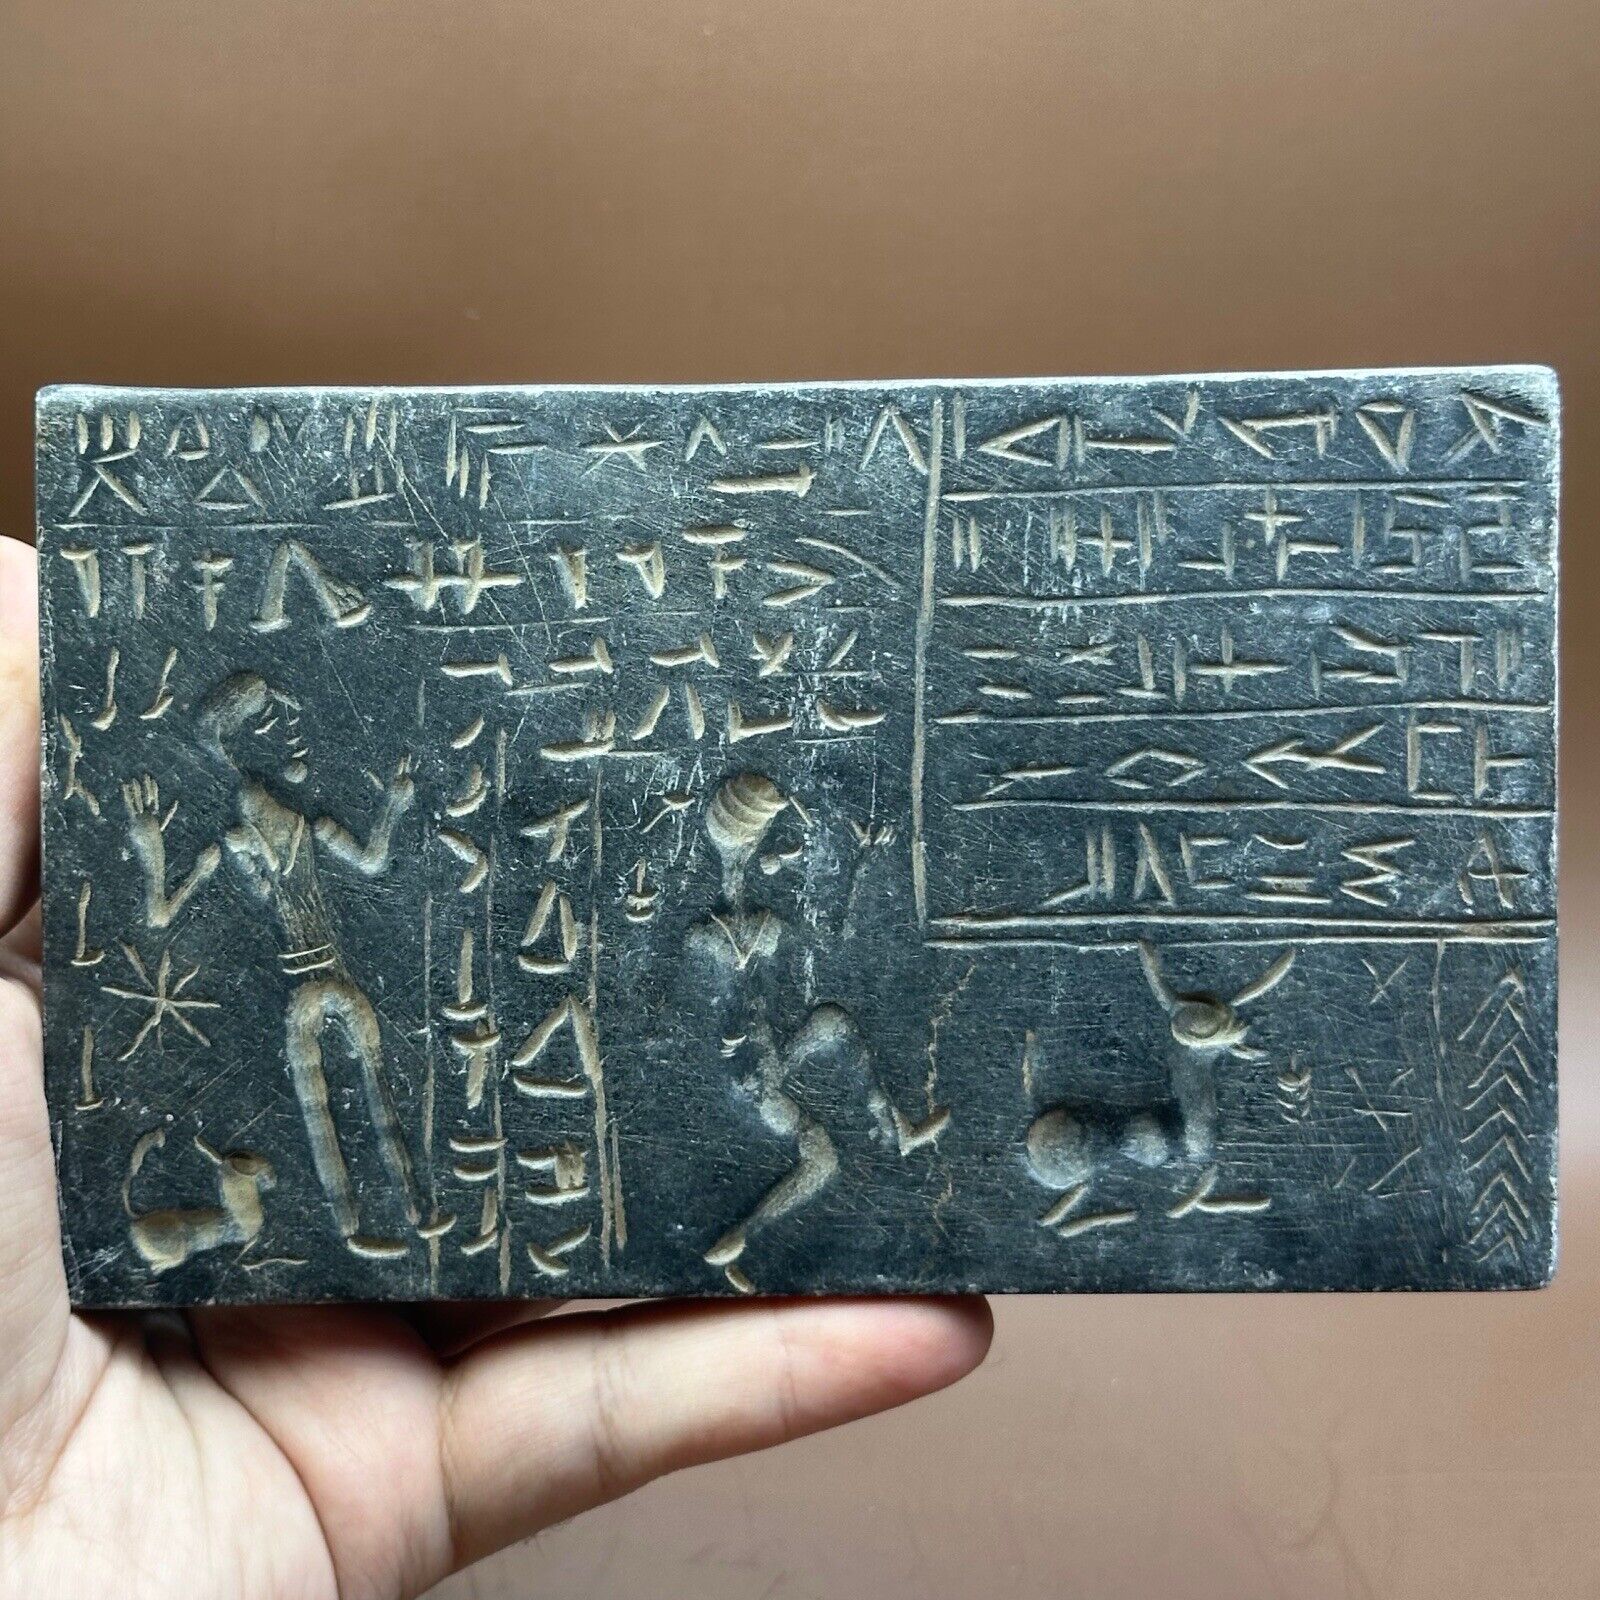 Wonderful Rare Ancient Near Eastern Stone Tablet With Ritual & Inscription Image